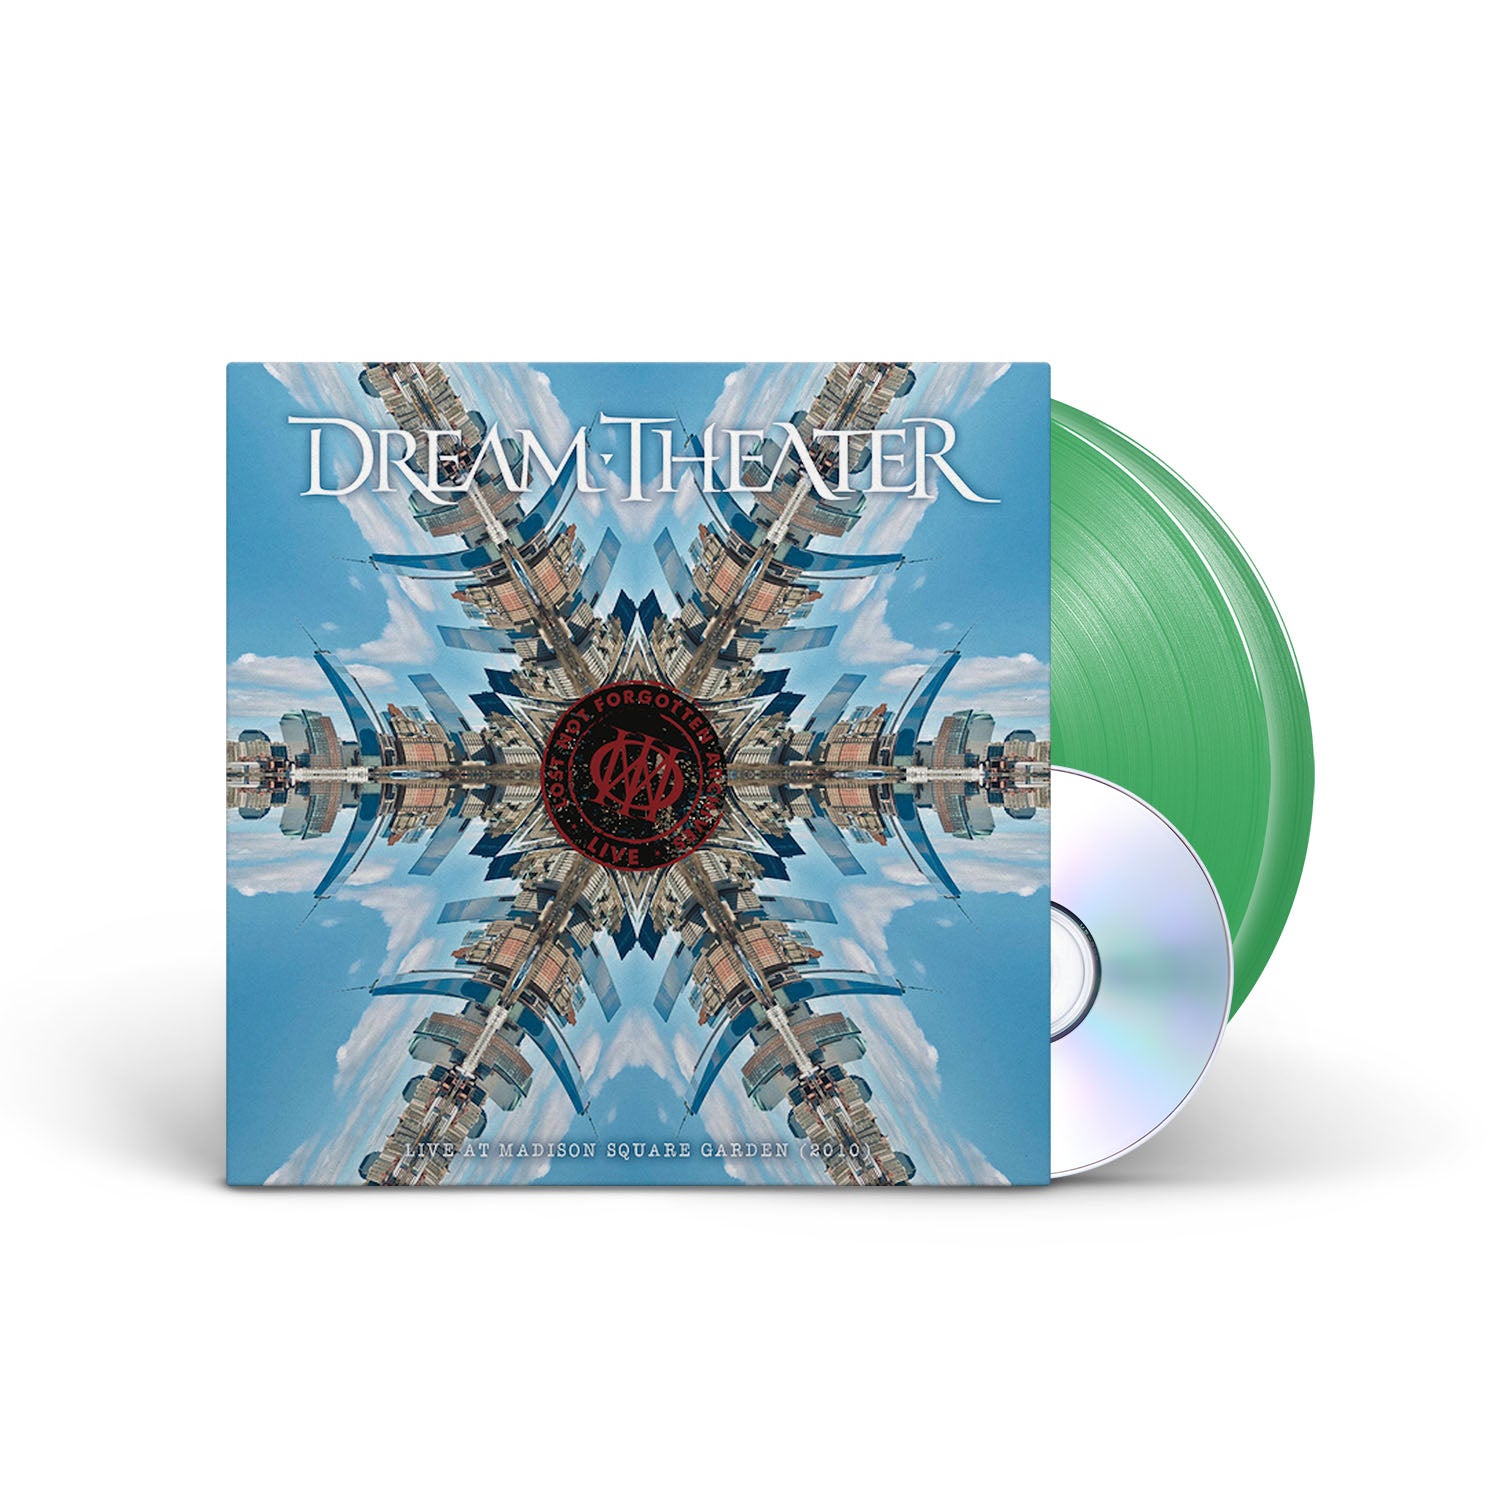 DREAM THEATER - Lost Not Forgotten Archives: Live at Madison Square Garden (2010) - Translucent Emerald Green 2xLP + CD